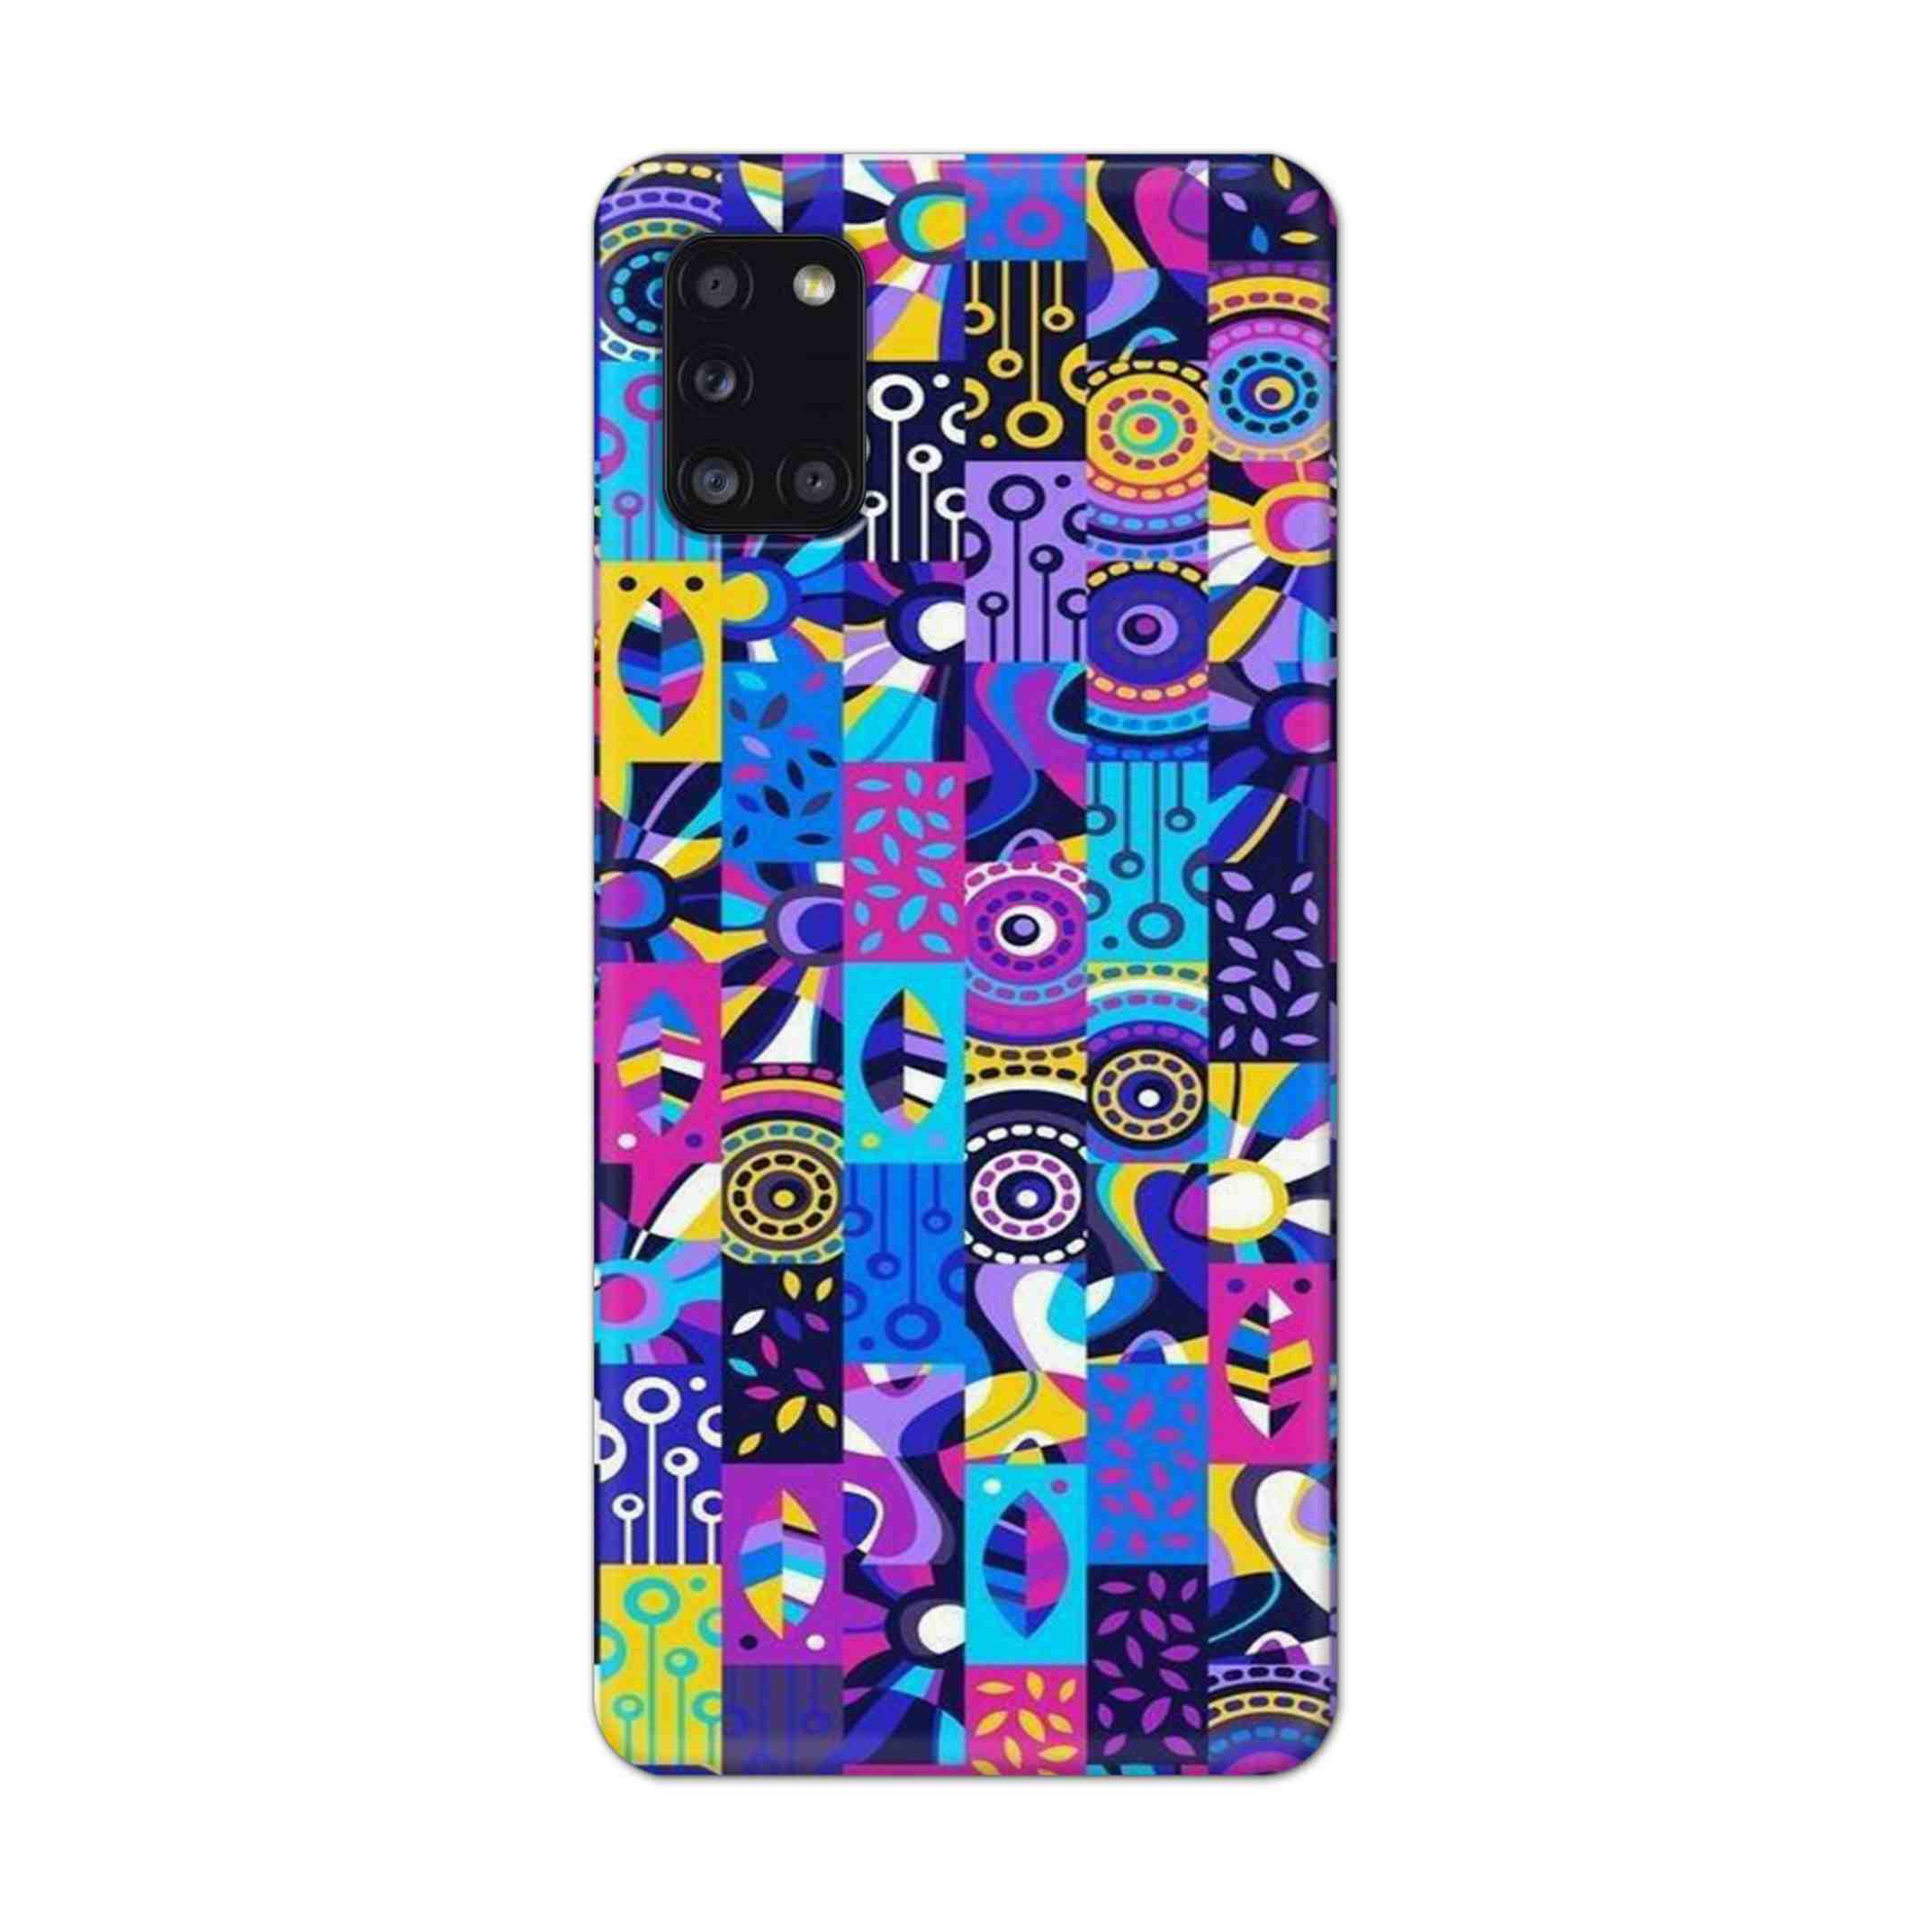 Buy Rainbow Art Hard Back Mobile Phone Case Cover For Samsung Galaxy A31 Online